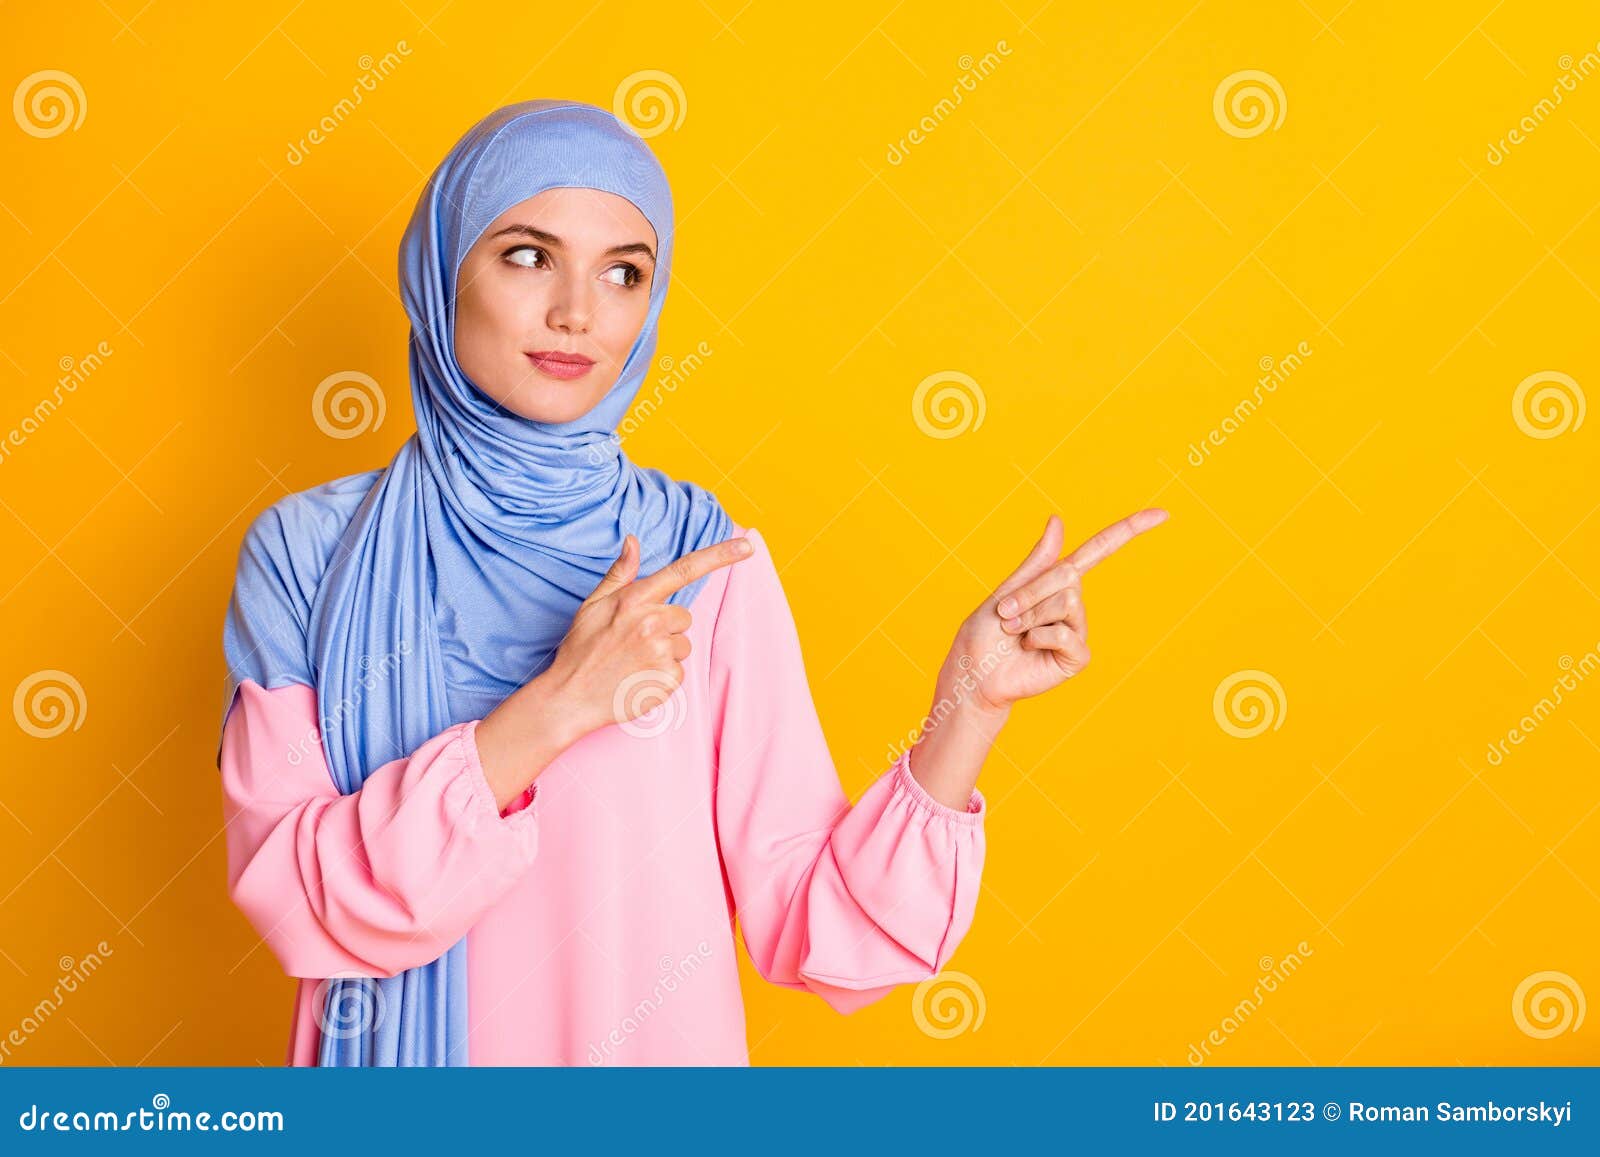 Portrait of Attractive Content Smart Muslimah Wearing Hijab ...